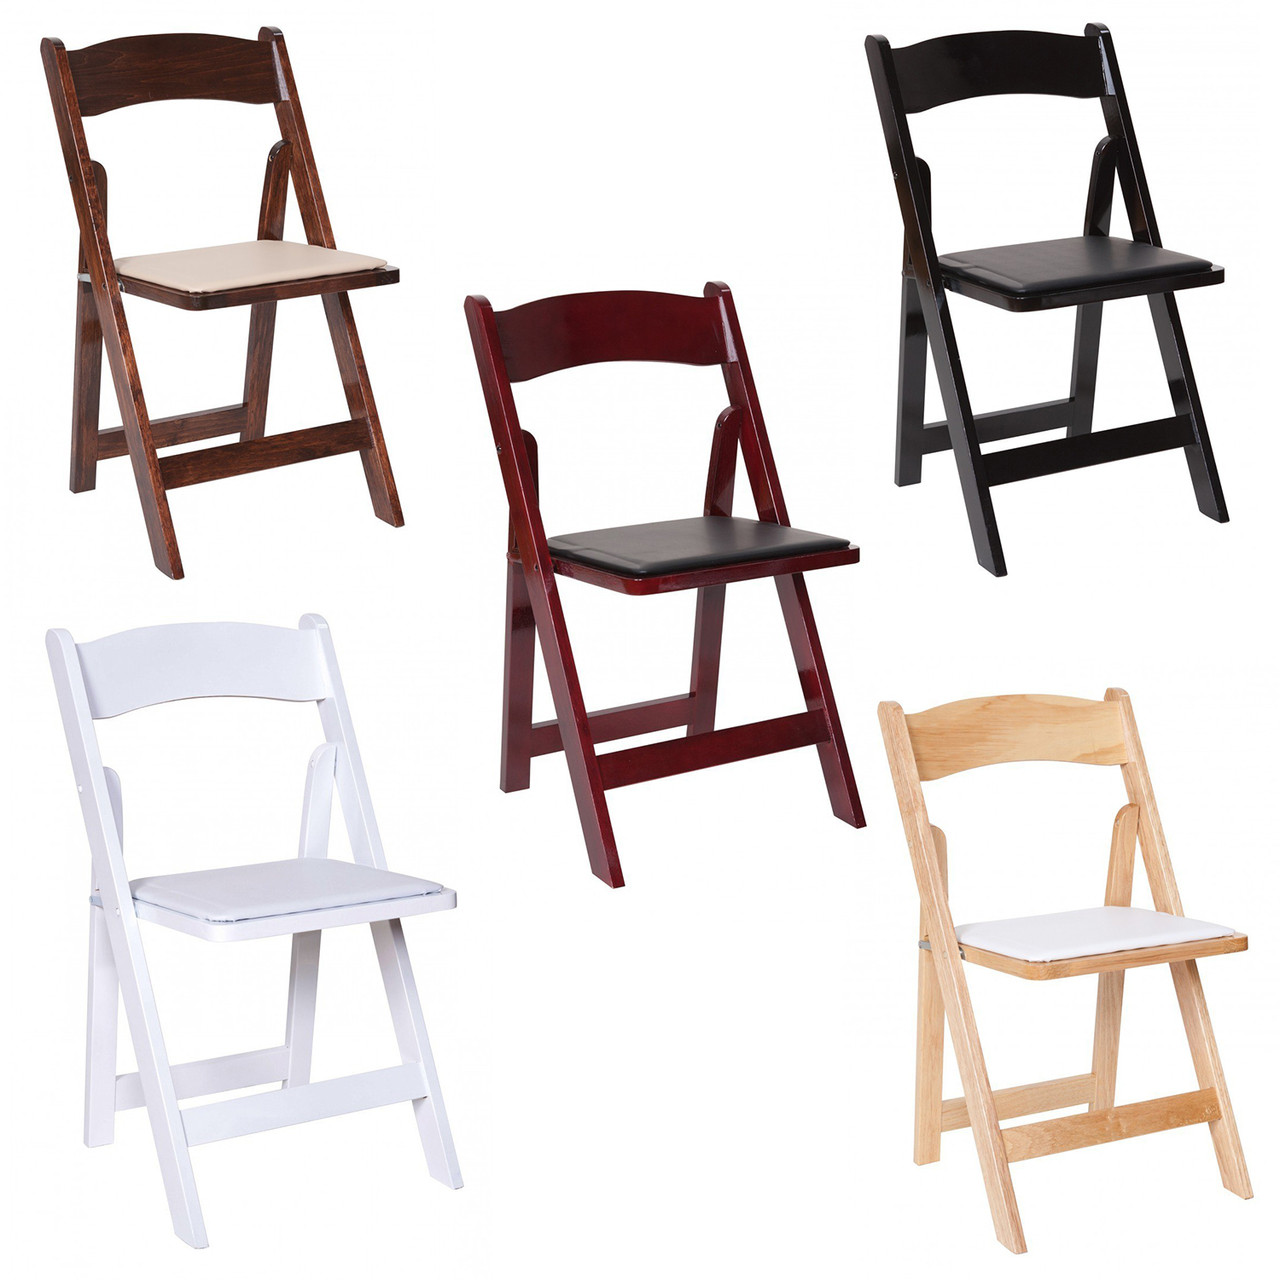 where to buy folding chairs